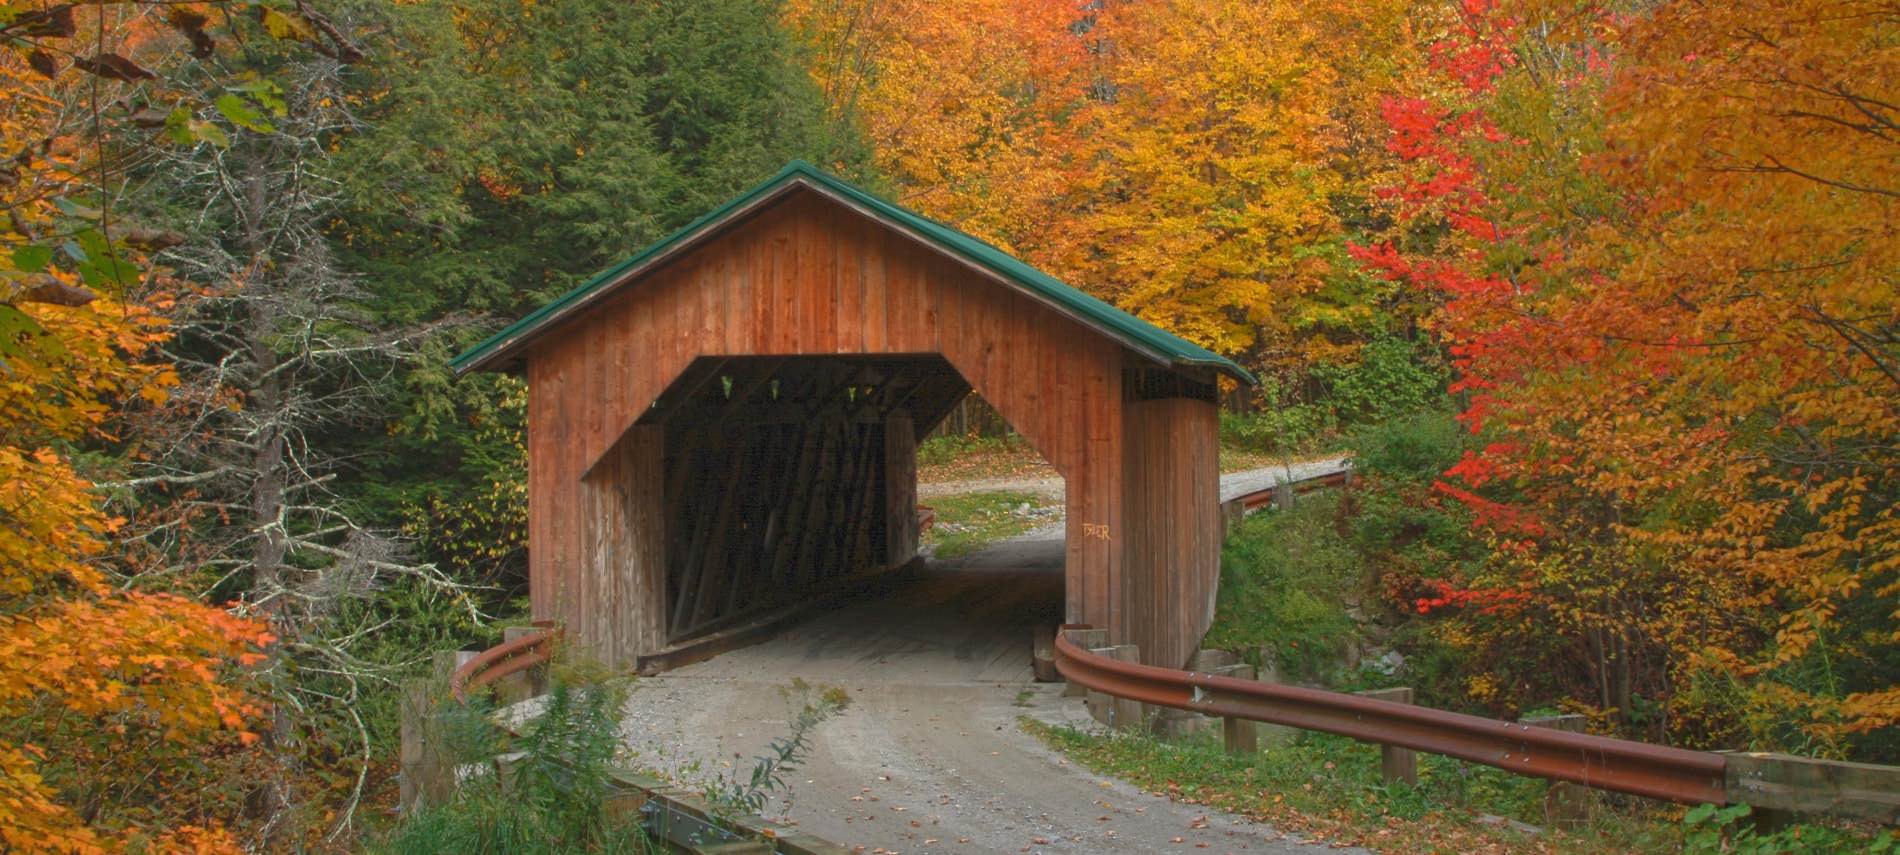 Cute wood covered bridge with green roof surrounded by trees filled with vibrant fall foliage